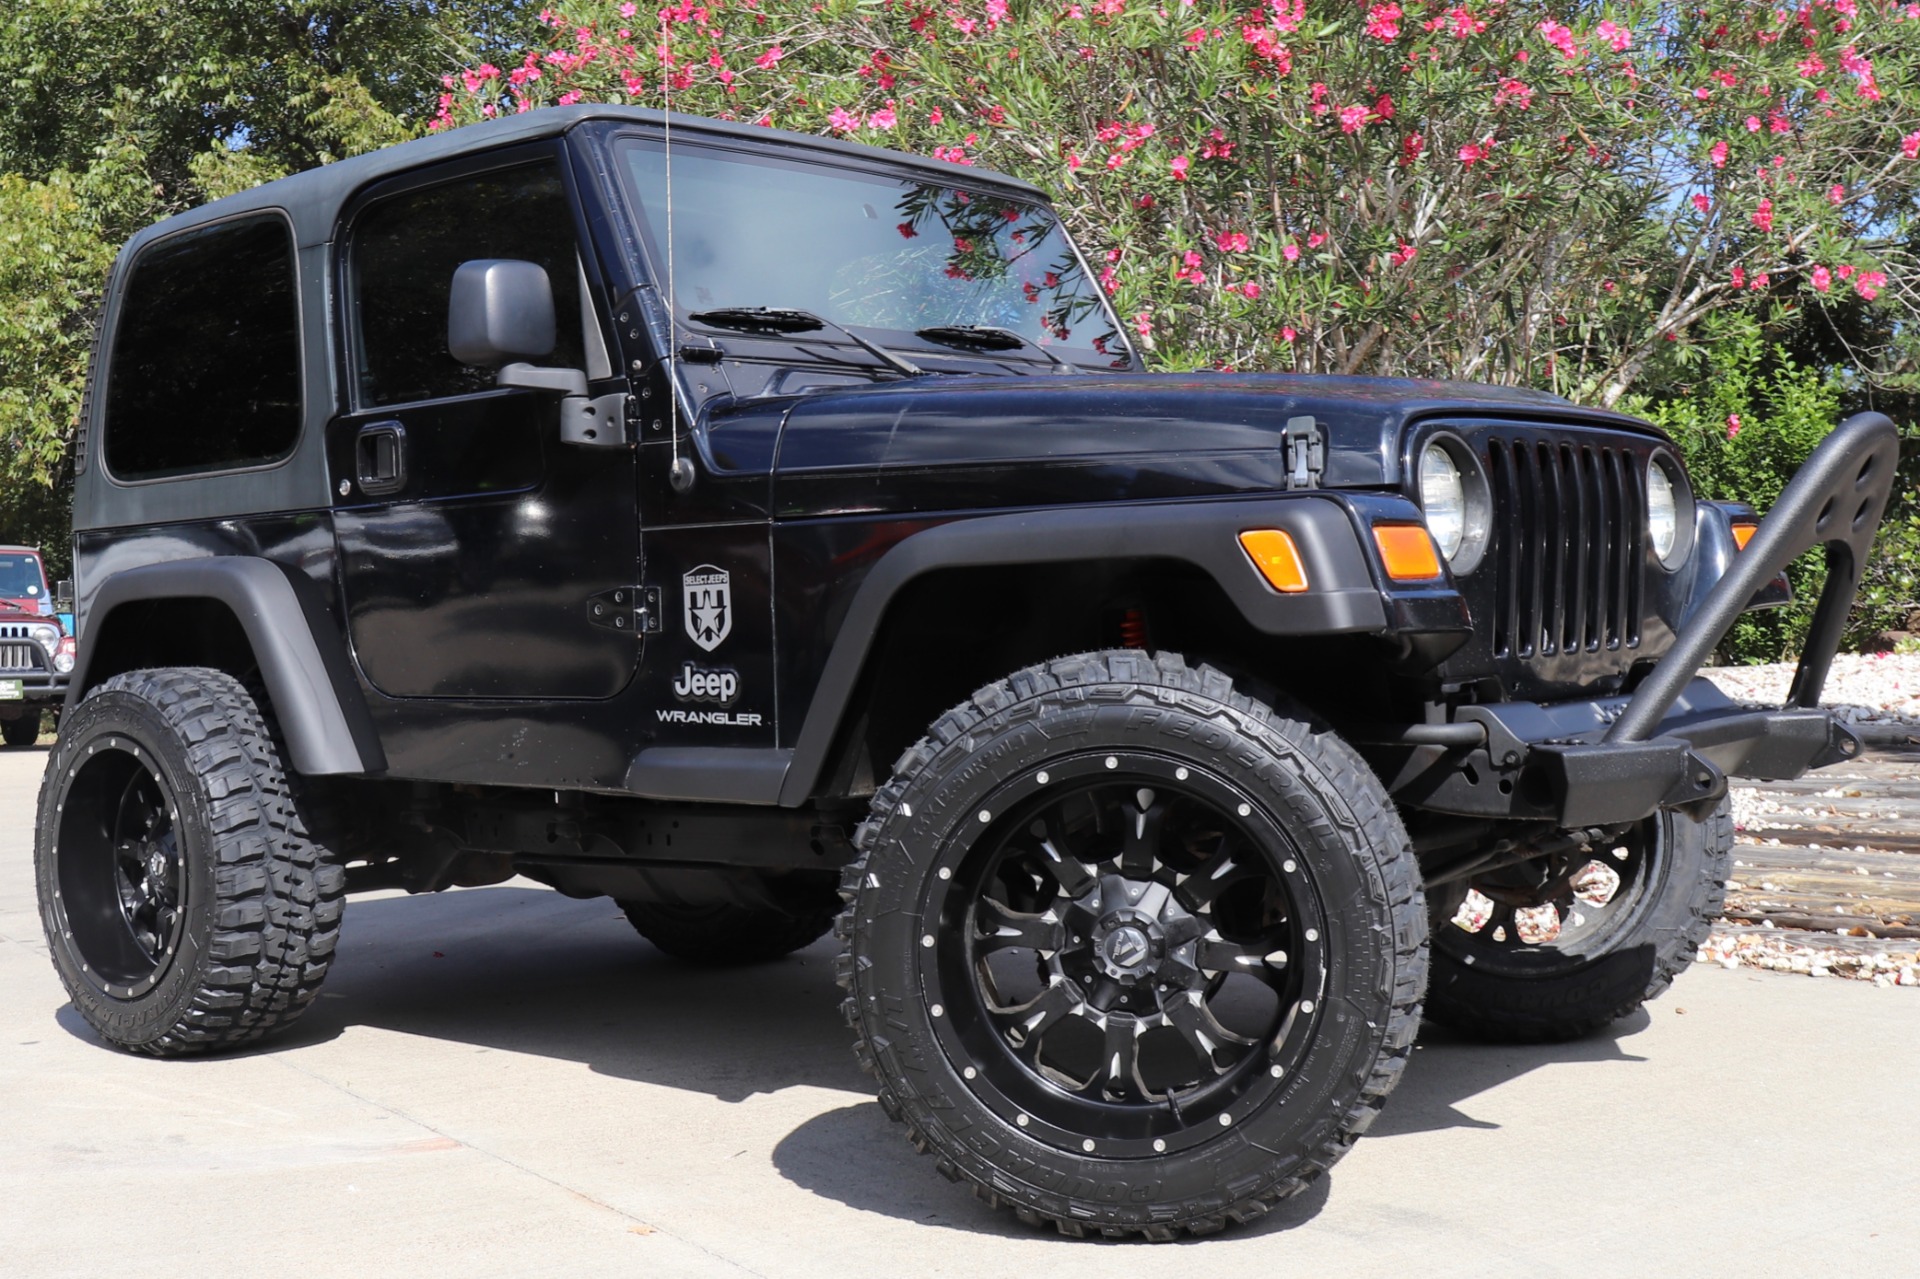 Used 2005 Jeep Wrangler X For Sale ($15,995) | Select Jeeps Inc. Stock  #301983